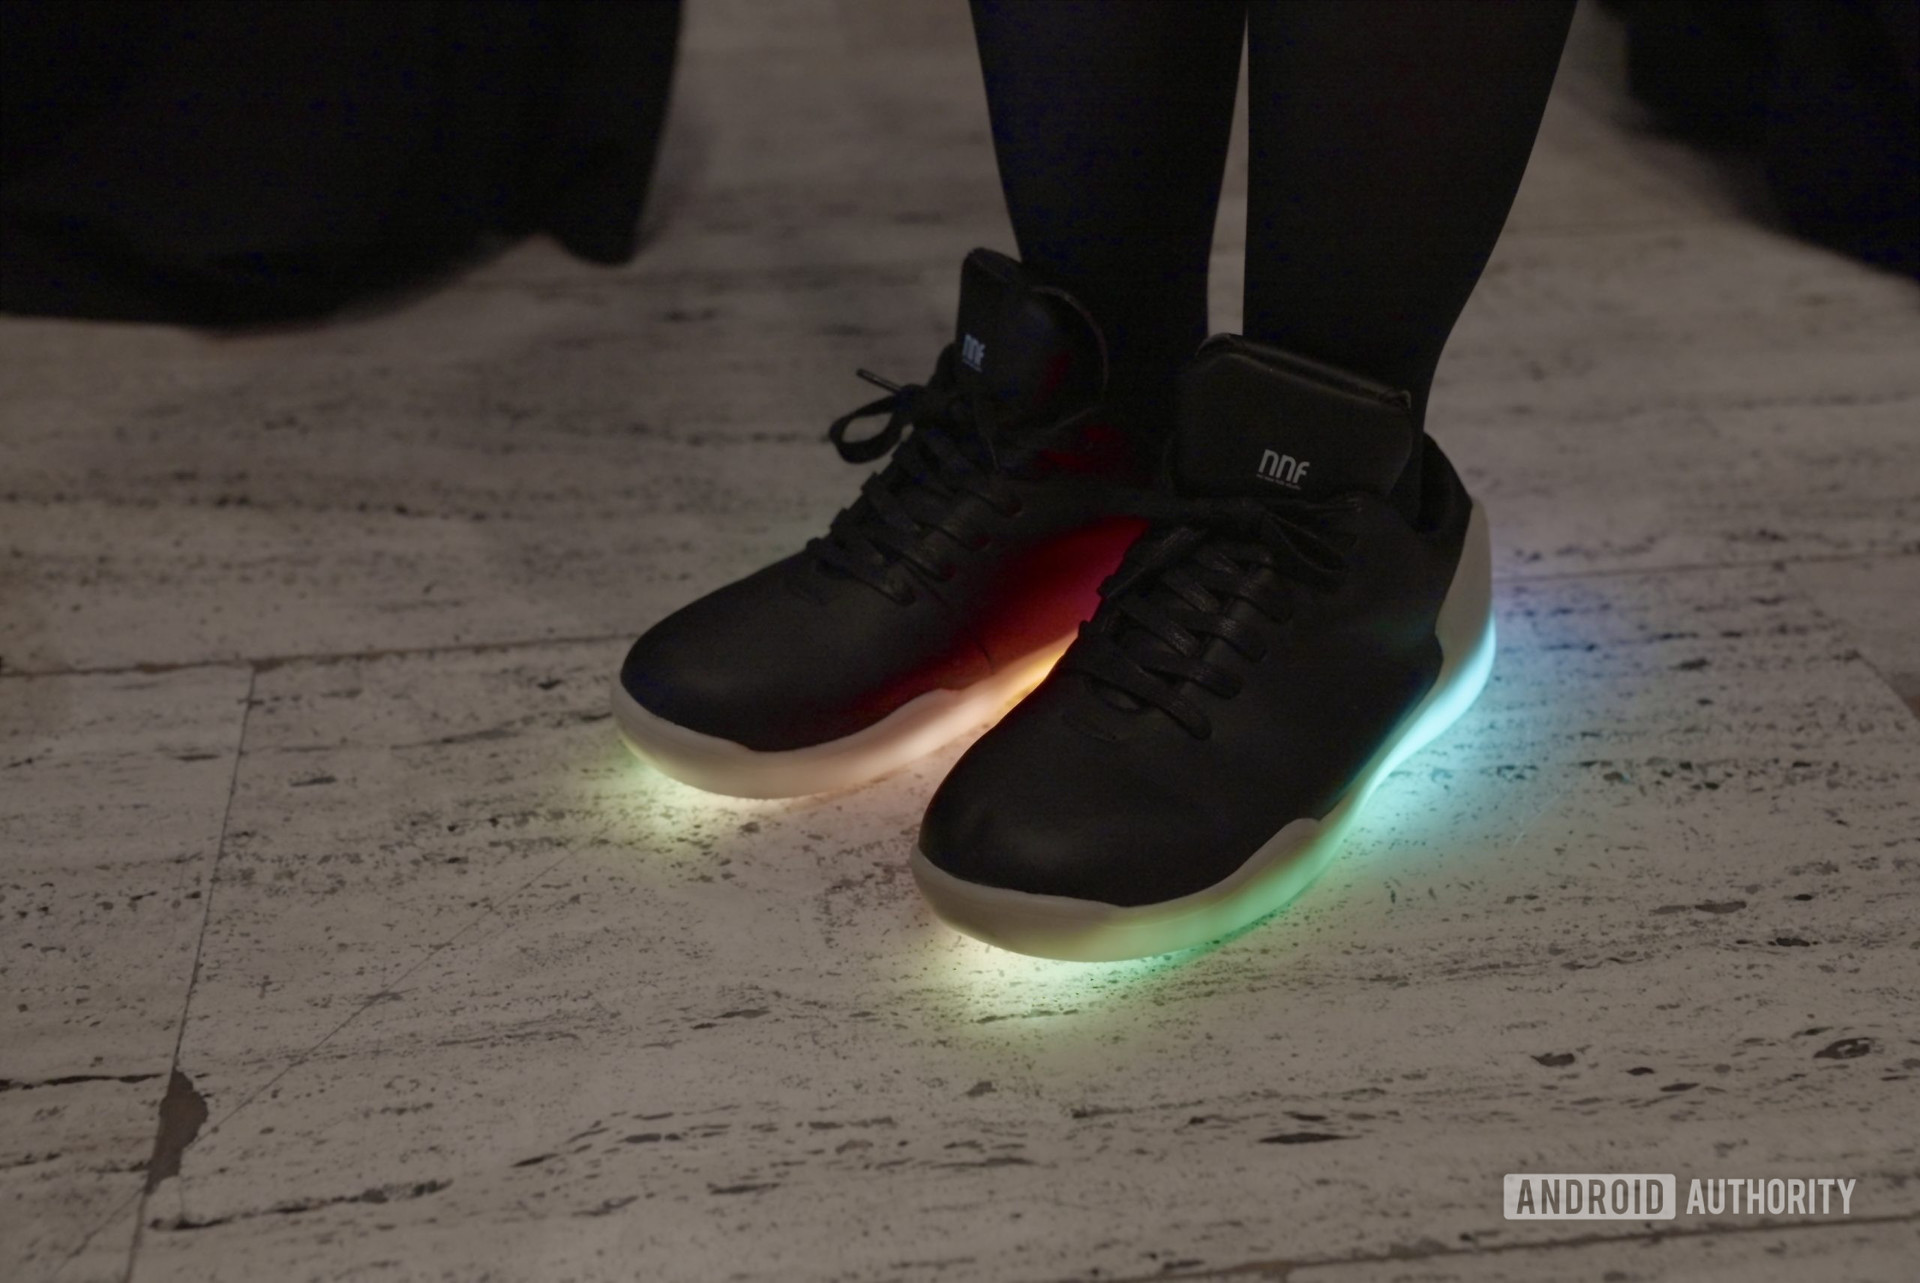 orphe shoe with light up soles